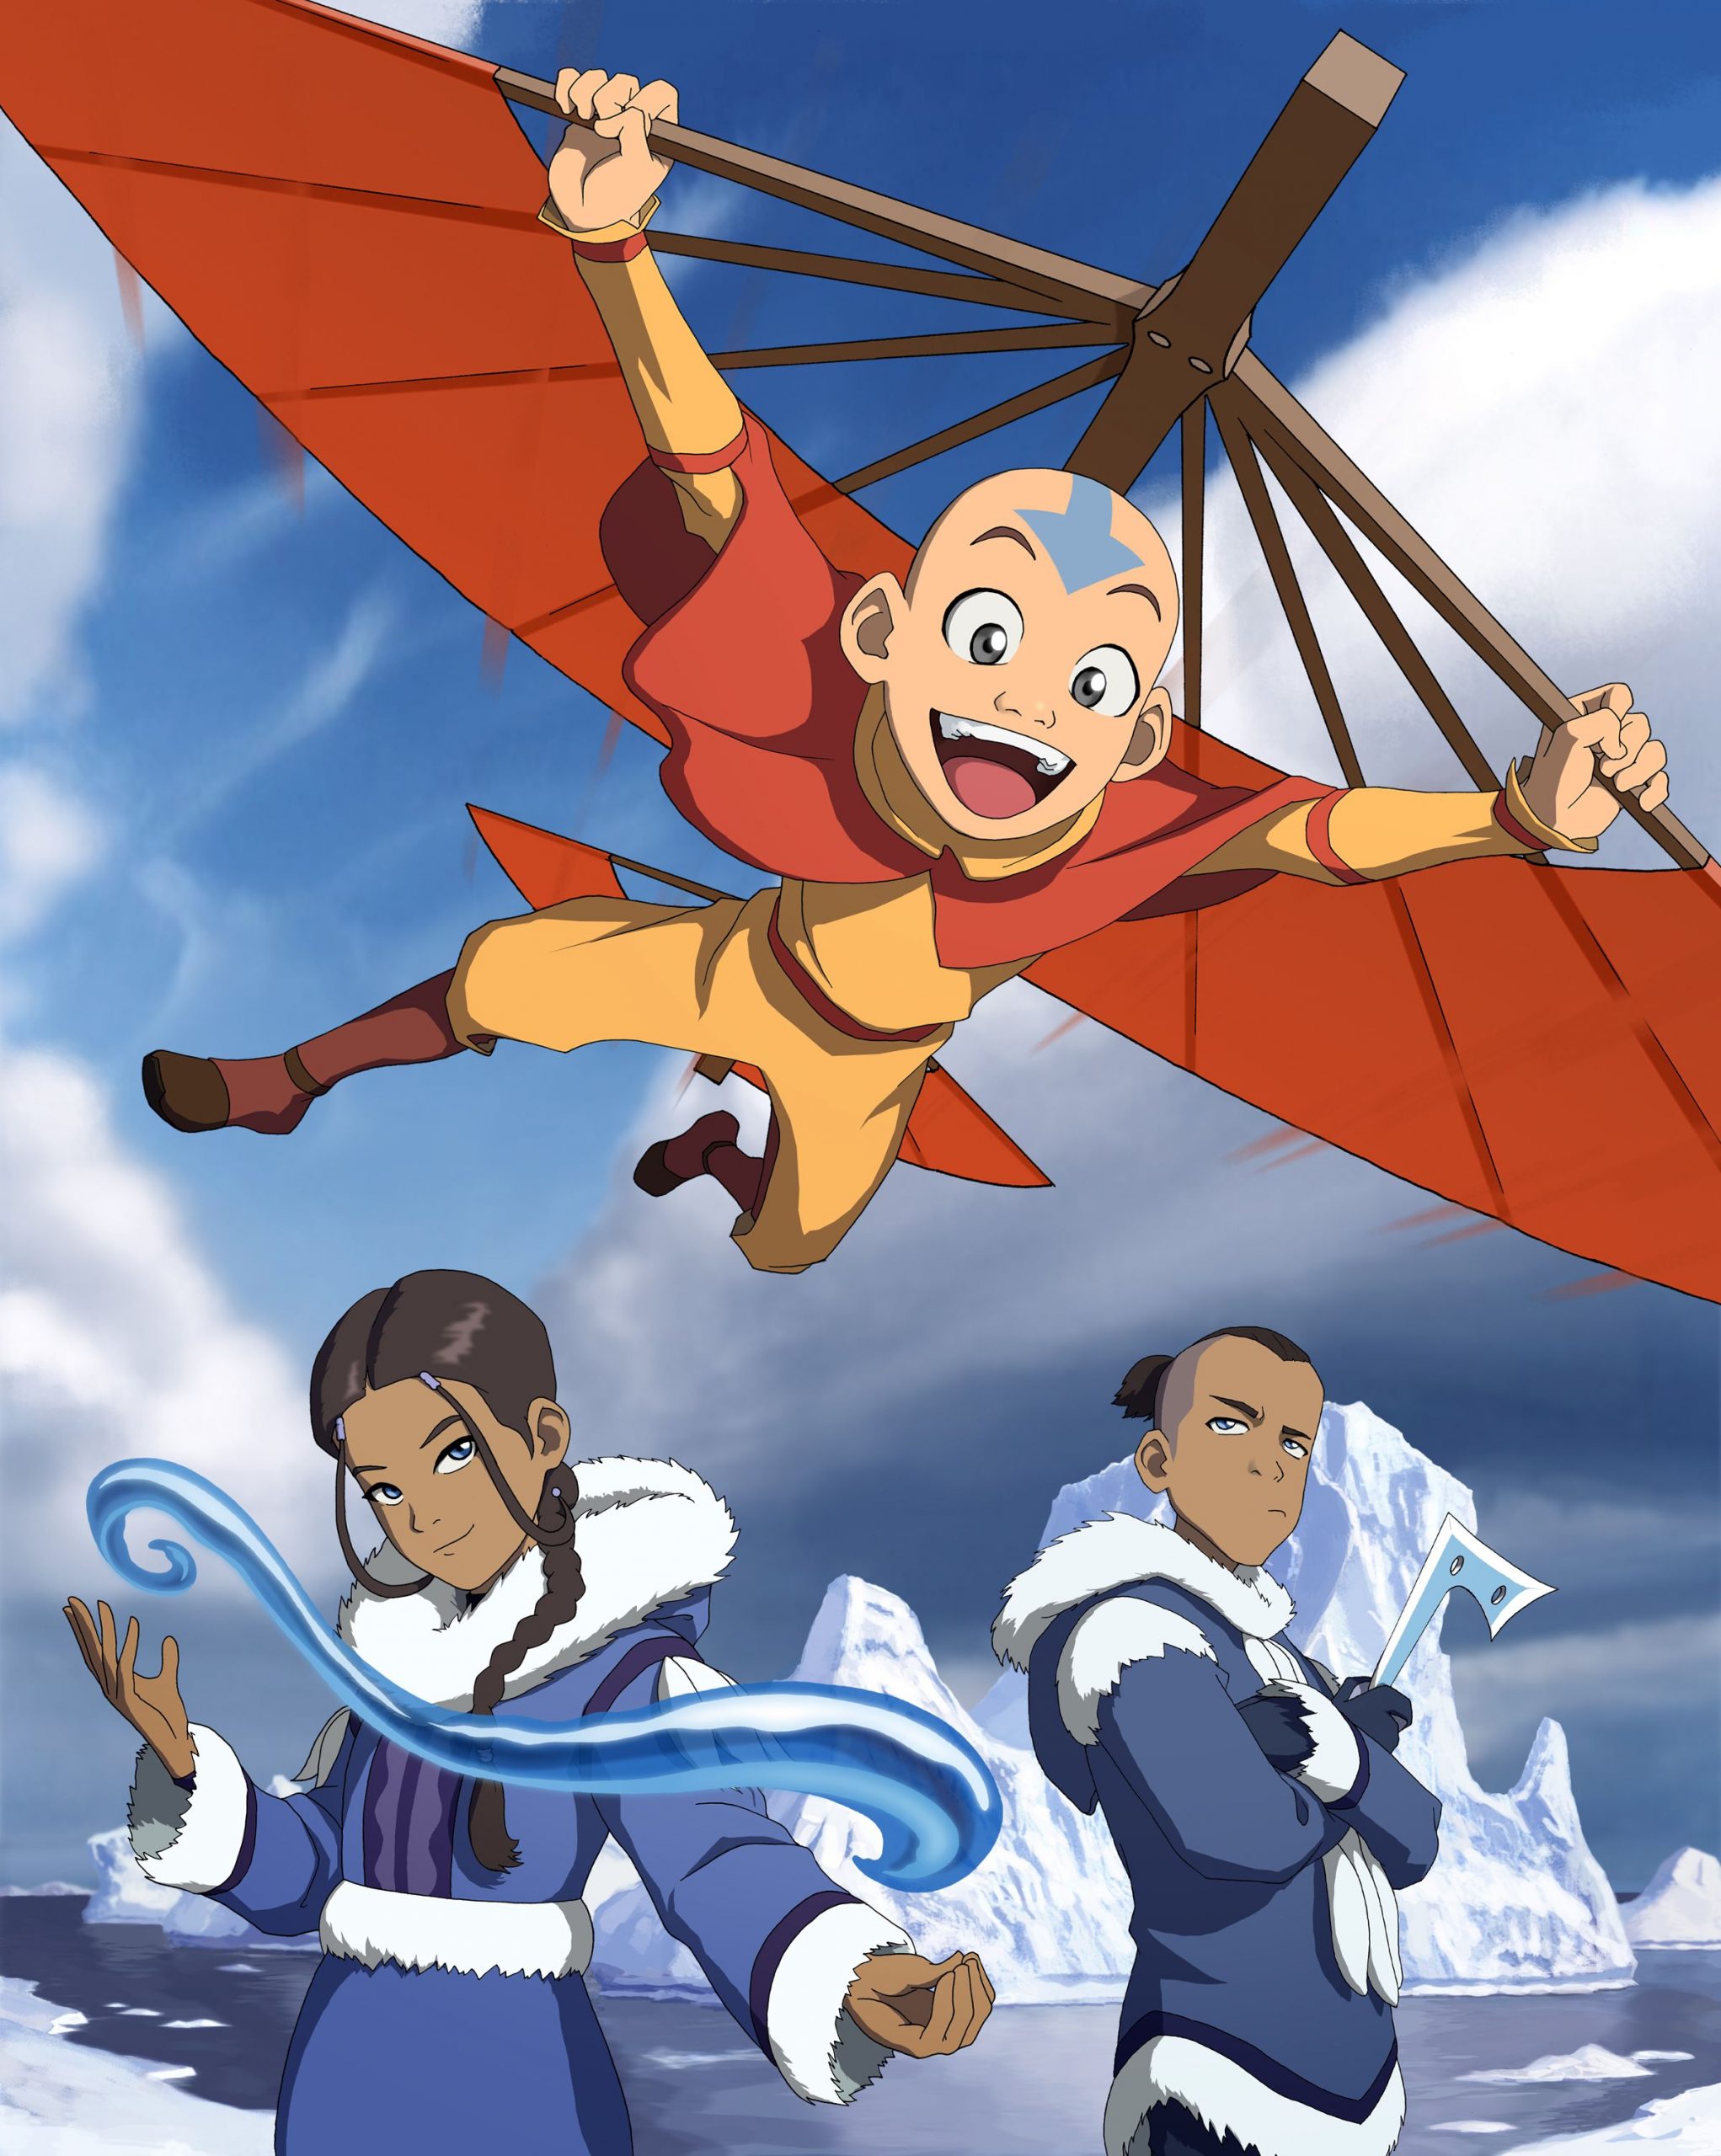 Cartoon of a young boy with a bald head and a blue arrow tattoo on top of his head flying in a wooden winged contraption. Below him are two older kids wearing a dark blue and white coat. The girl on the left extends her hands to her sides with her palms up. A long, smooth, curvy shape floats in front of her with each end above her hands. The boy folds his hands across his chest, holding a small axe or an ice pick. Several icebergs float in the background.